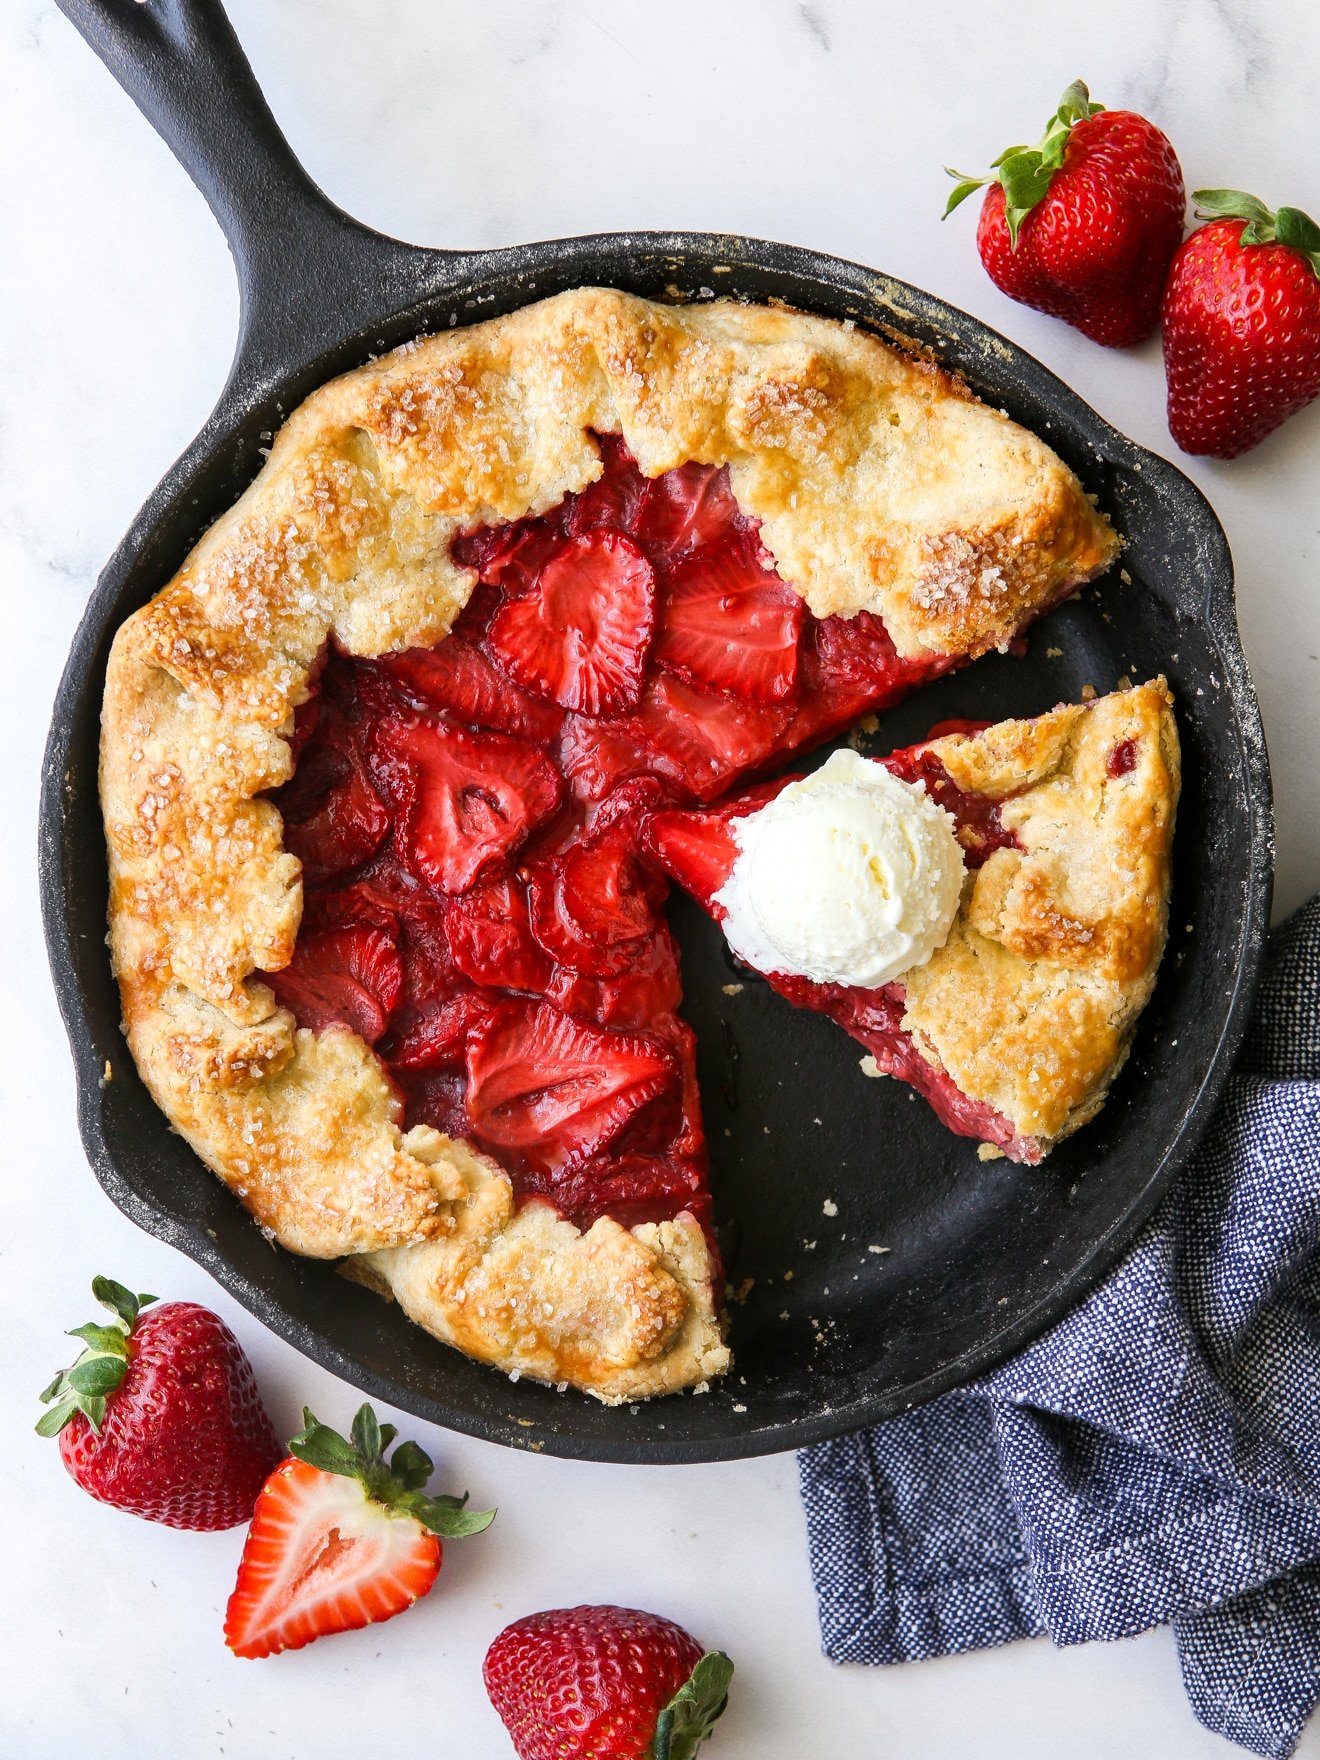 Strawberry Skillet Pie - Completely Delicious